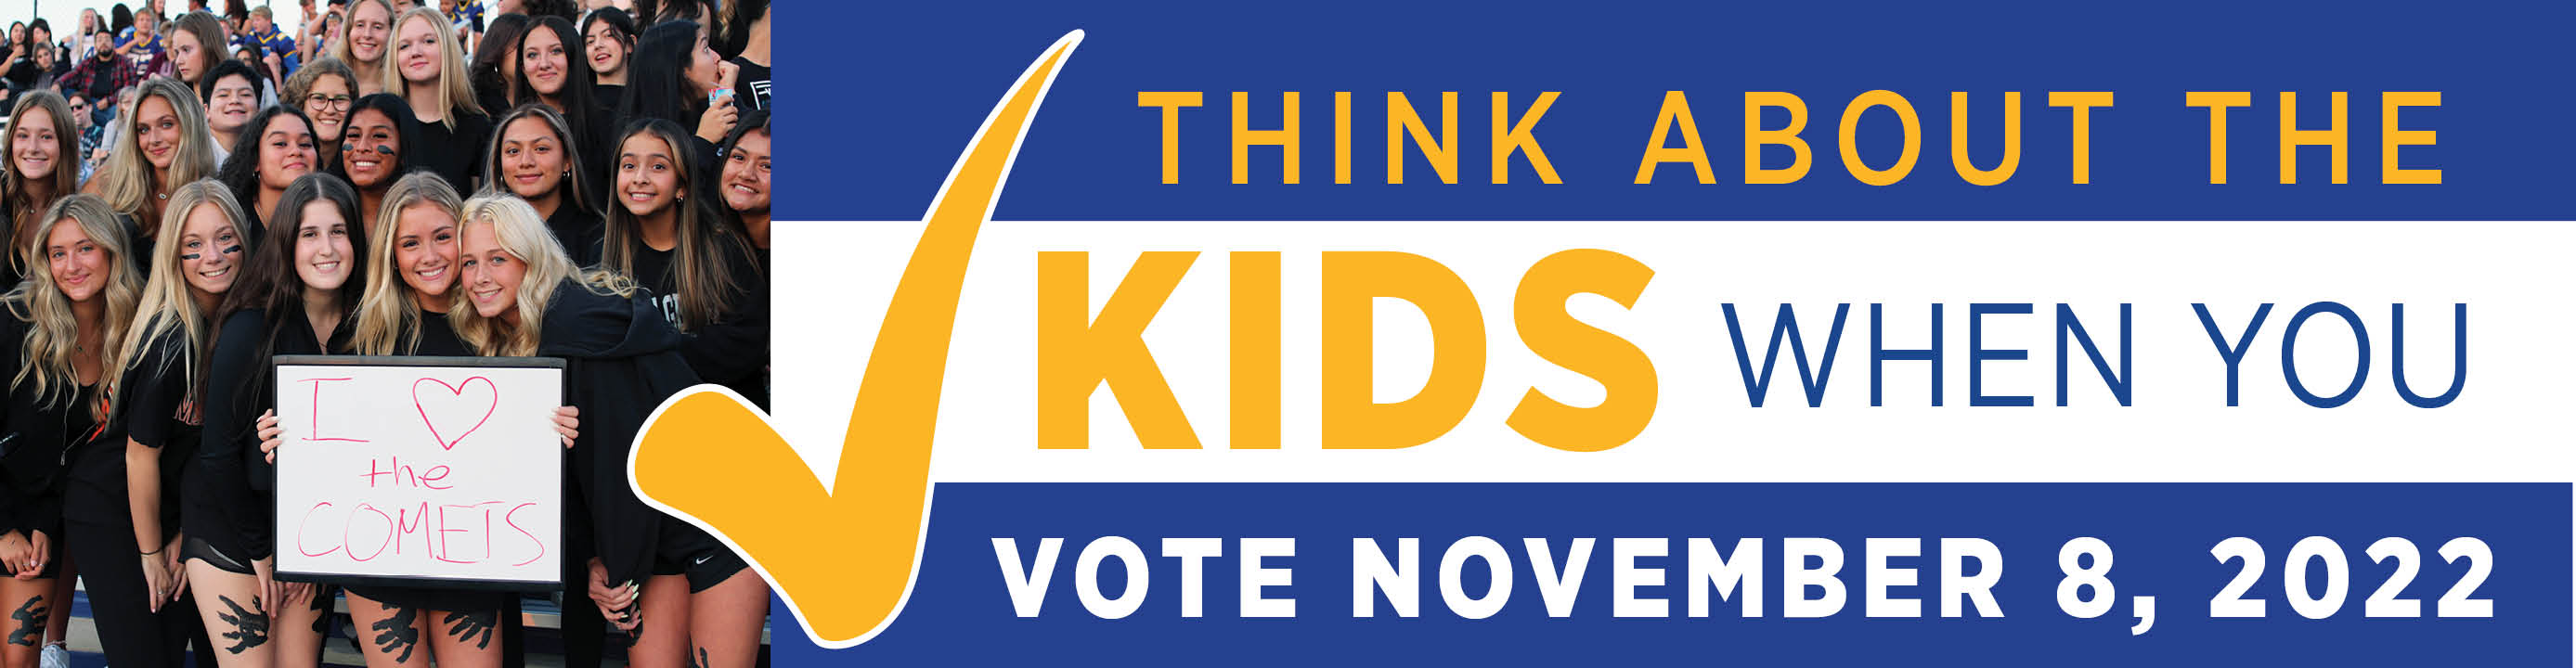 Vote for the Kids